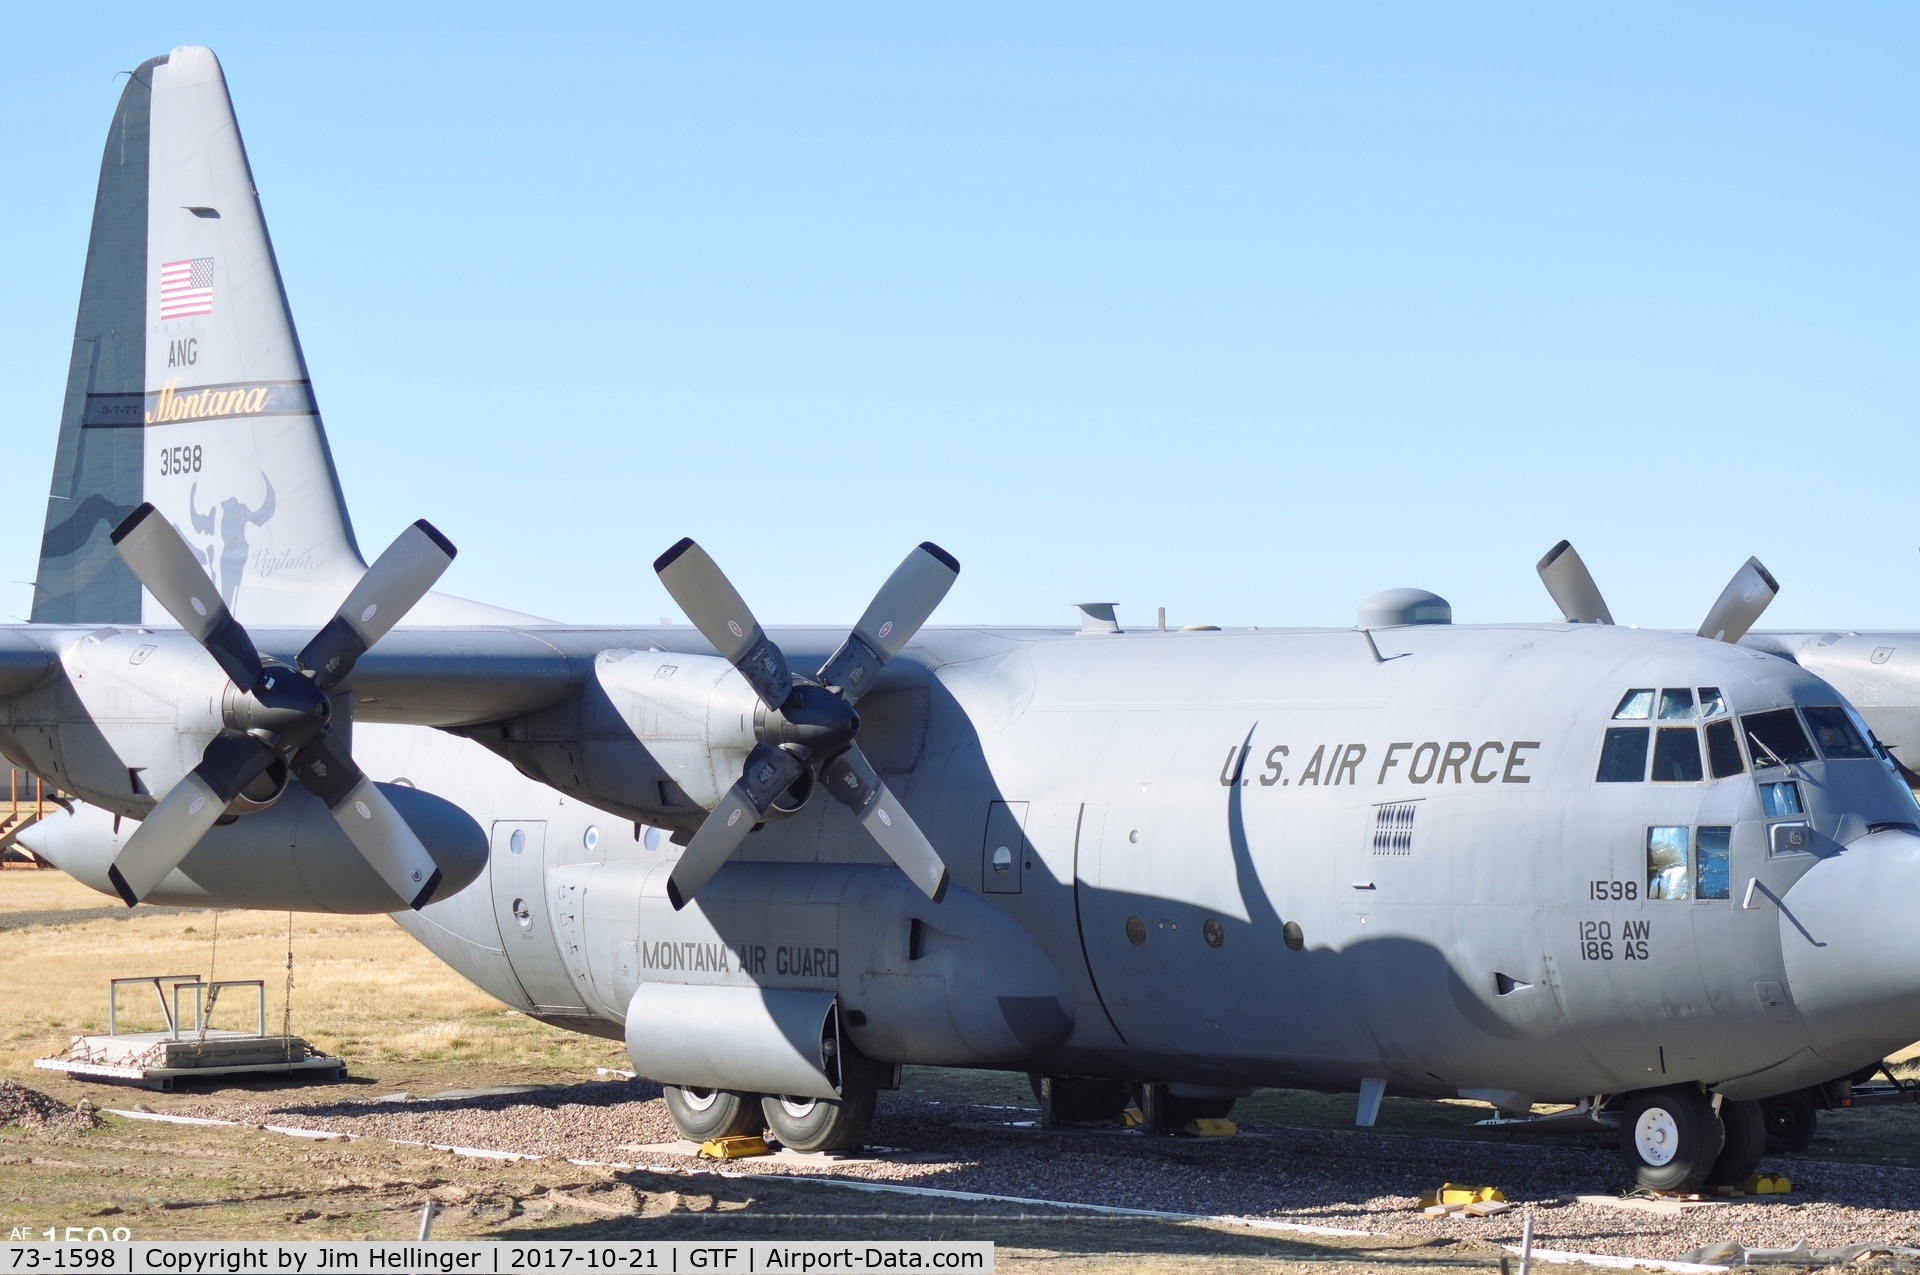 73-1598, 1973 Lockheed C-130H Hercules C/N 382-4573, 1598 retired with around 24,000 flight hours. Seen here being put on permanent display at GTF airport (2017).